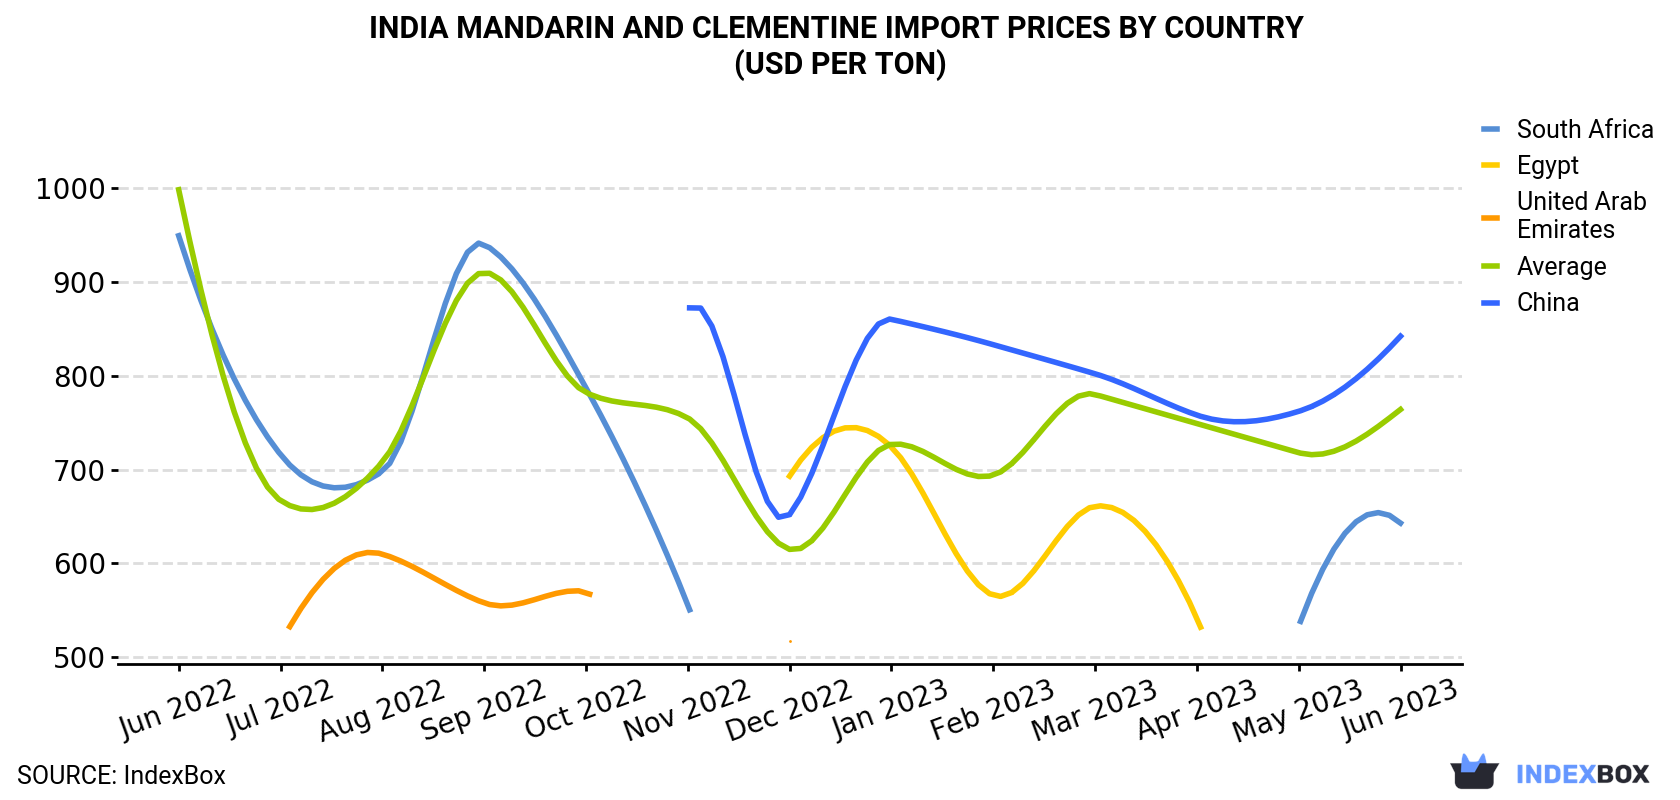 India Mandarin and Clementine Import Prices By Country (USD Per Ton)